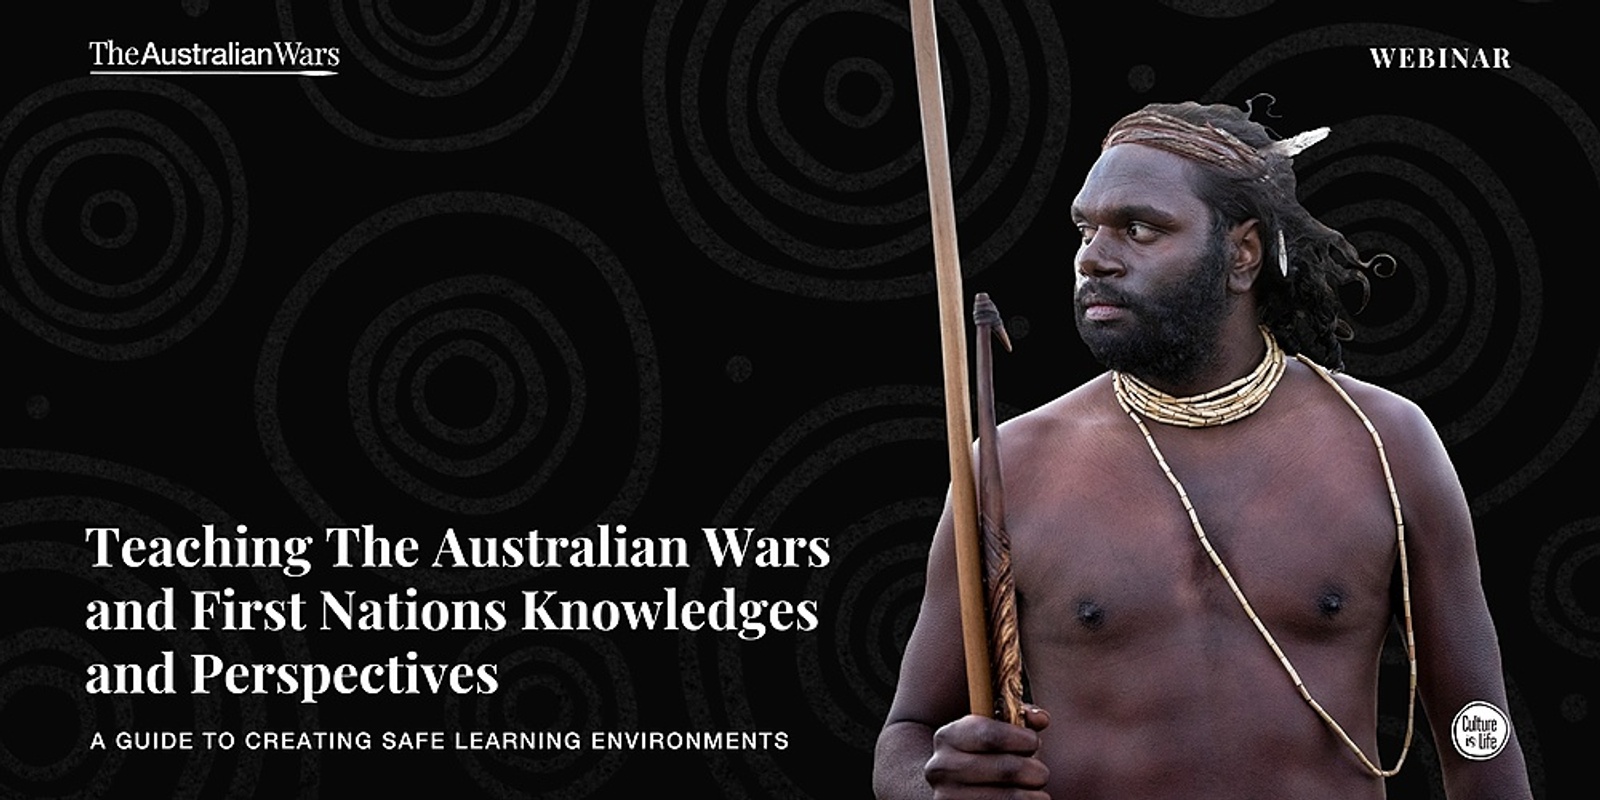 'Teaching The Australian Wars & First Nations Perspectives & Knowledges' Webinar